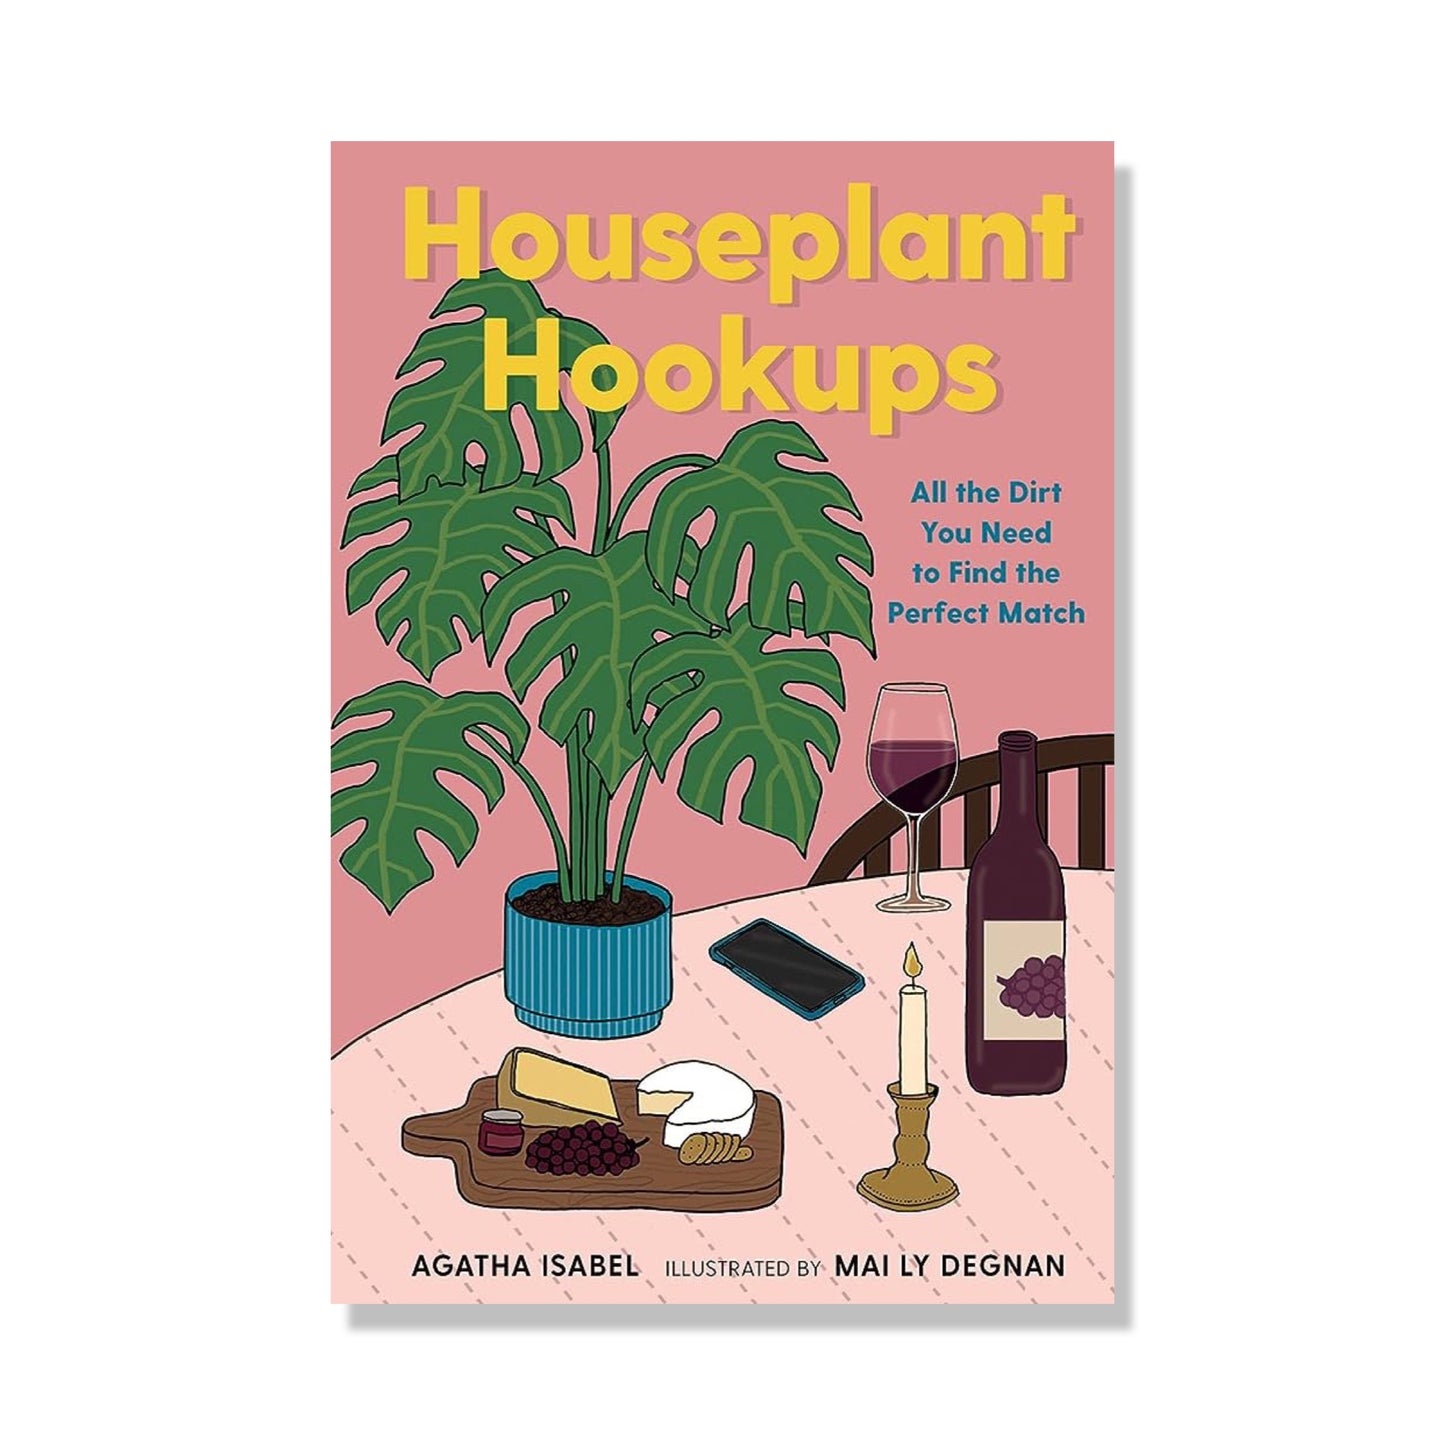 Houseplant Hookups: All the Dirt You Need to Find the Perfect Match